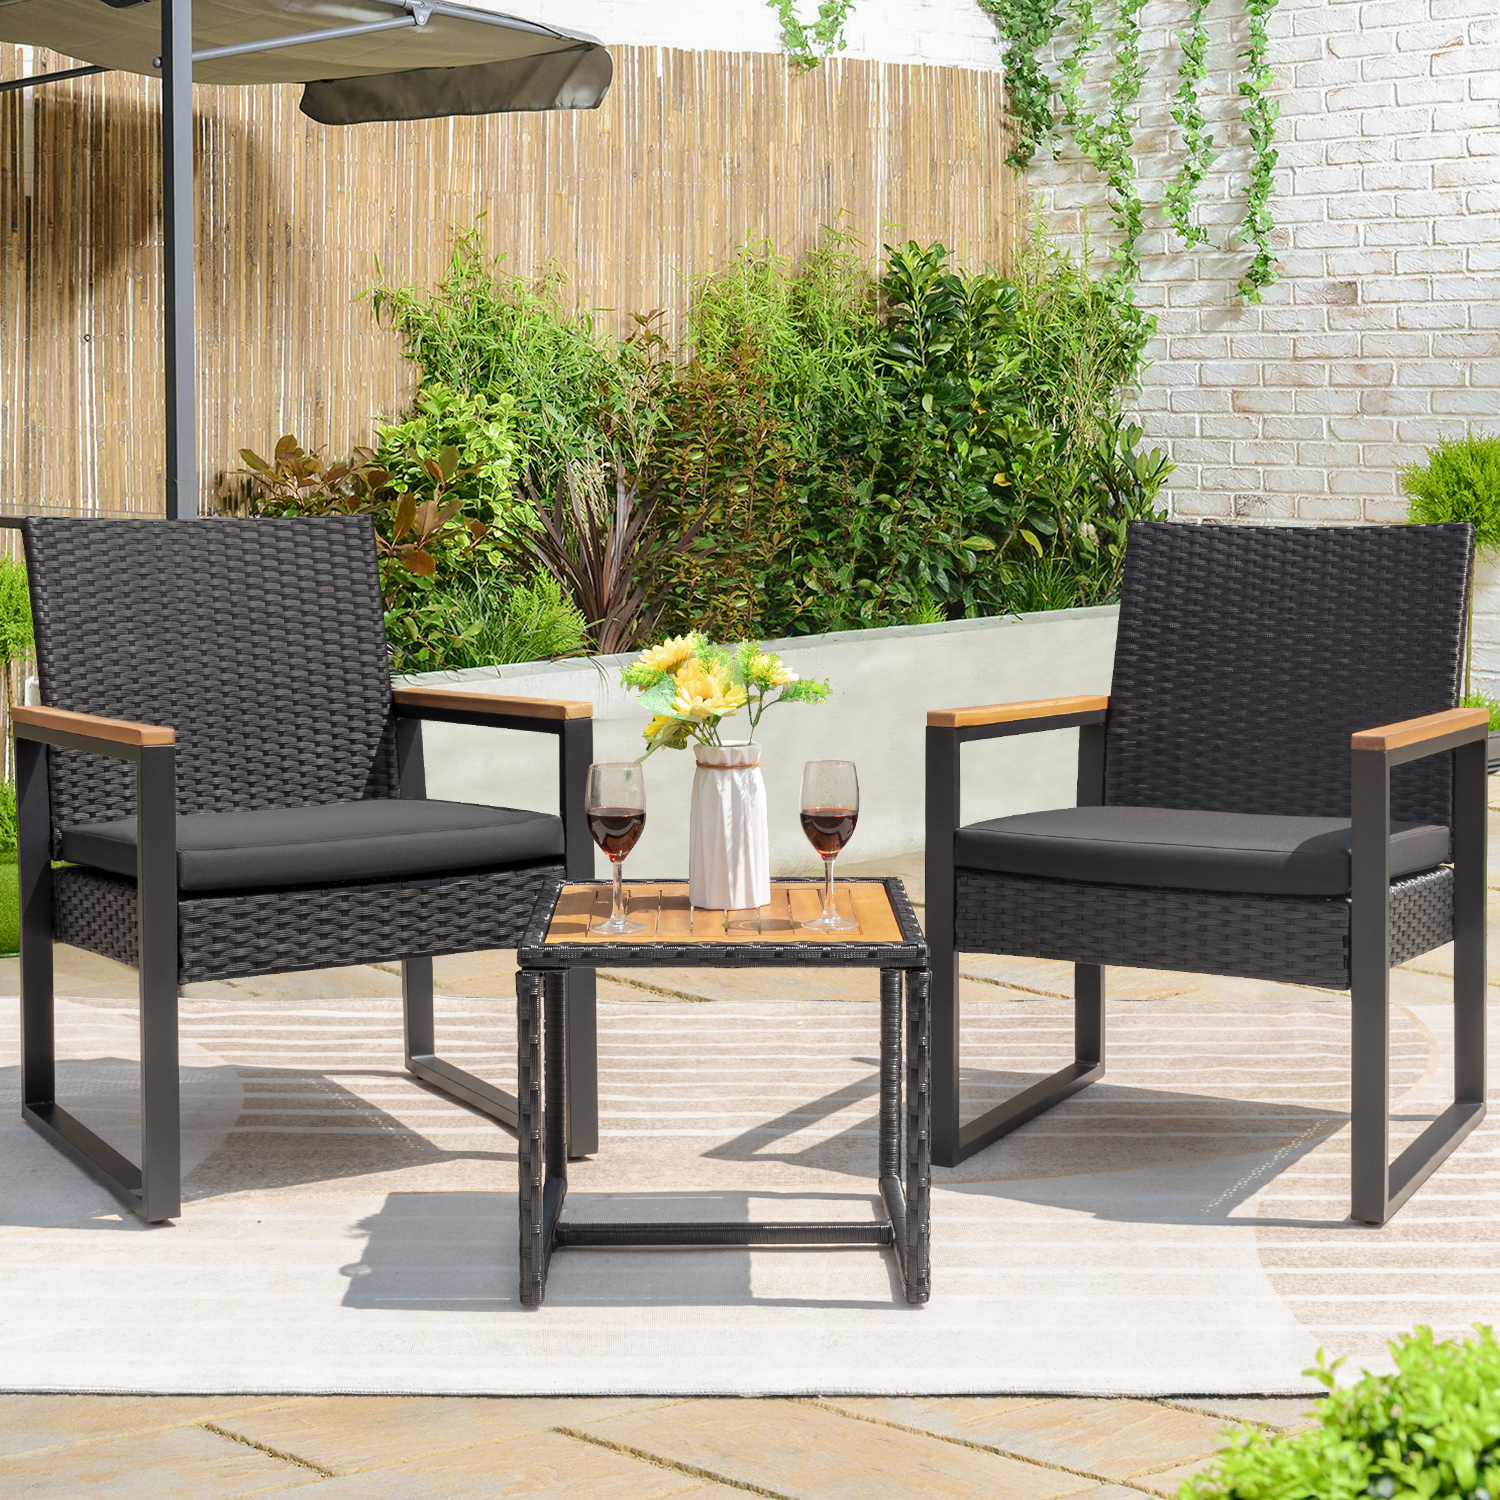 Devoko 3 Pieces Patio Conversation Set Outdoor Rattan Chair Set of 2 with Wood Coffee Table, Black - image 1 of 7